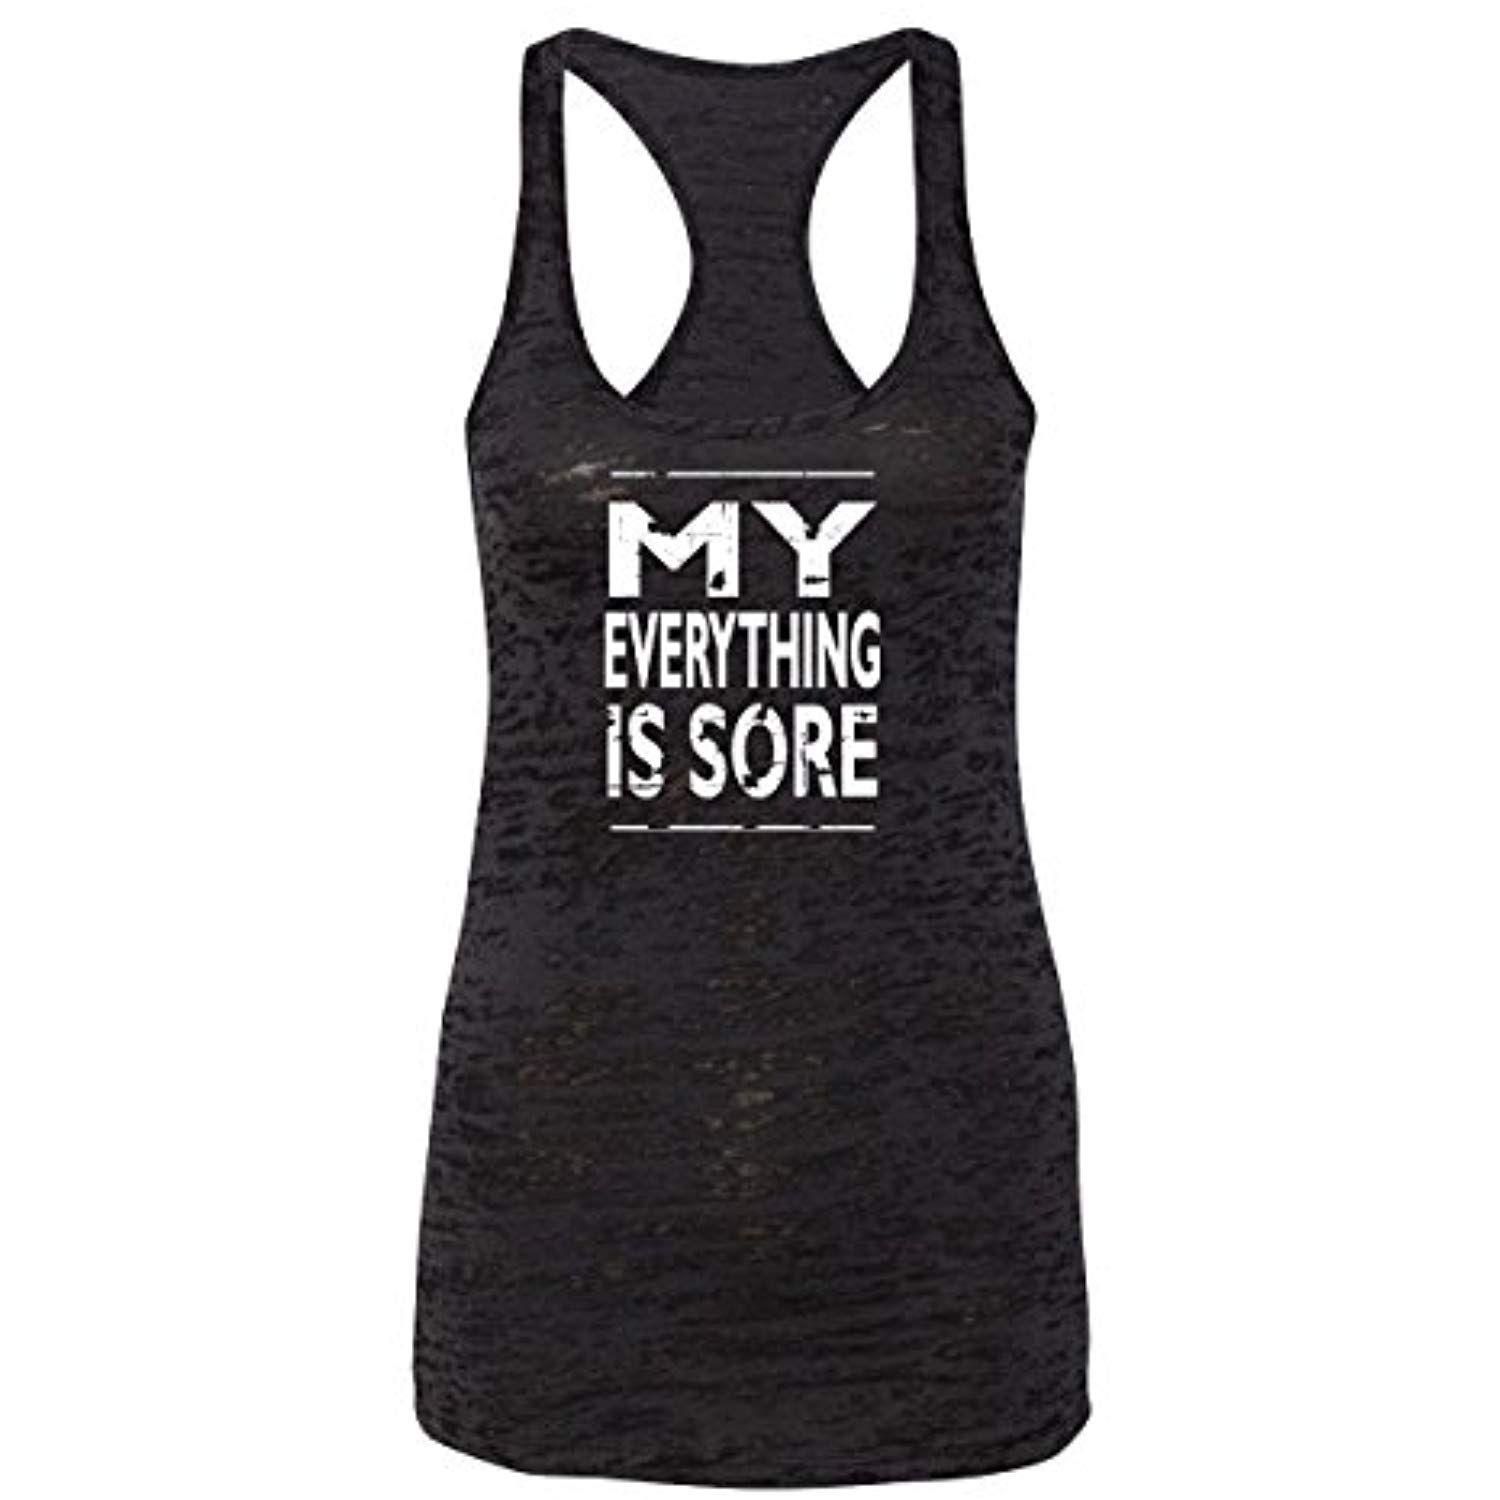 Sports Clothing and Apparel Arrow Logo - Orange Arrow Womens Workout Tanks - My Everything Is Sore - Tops ...